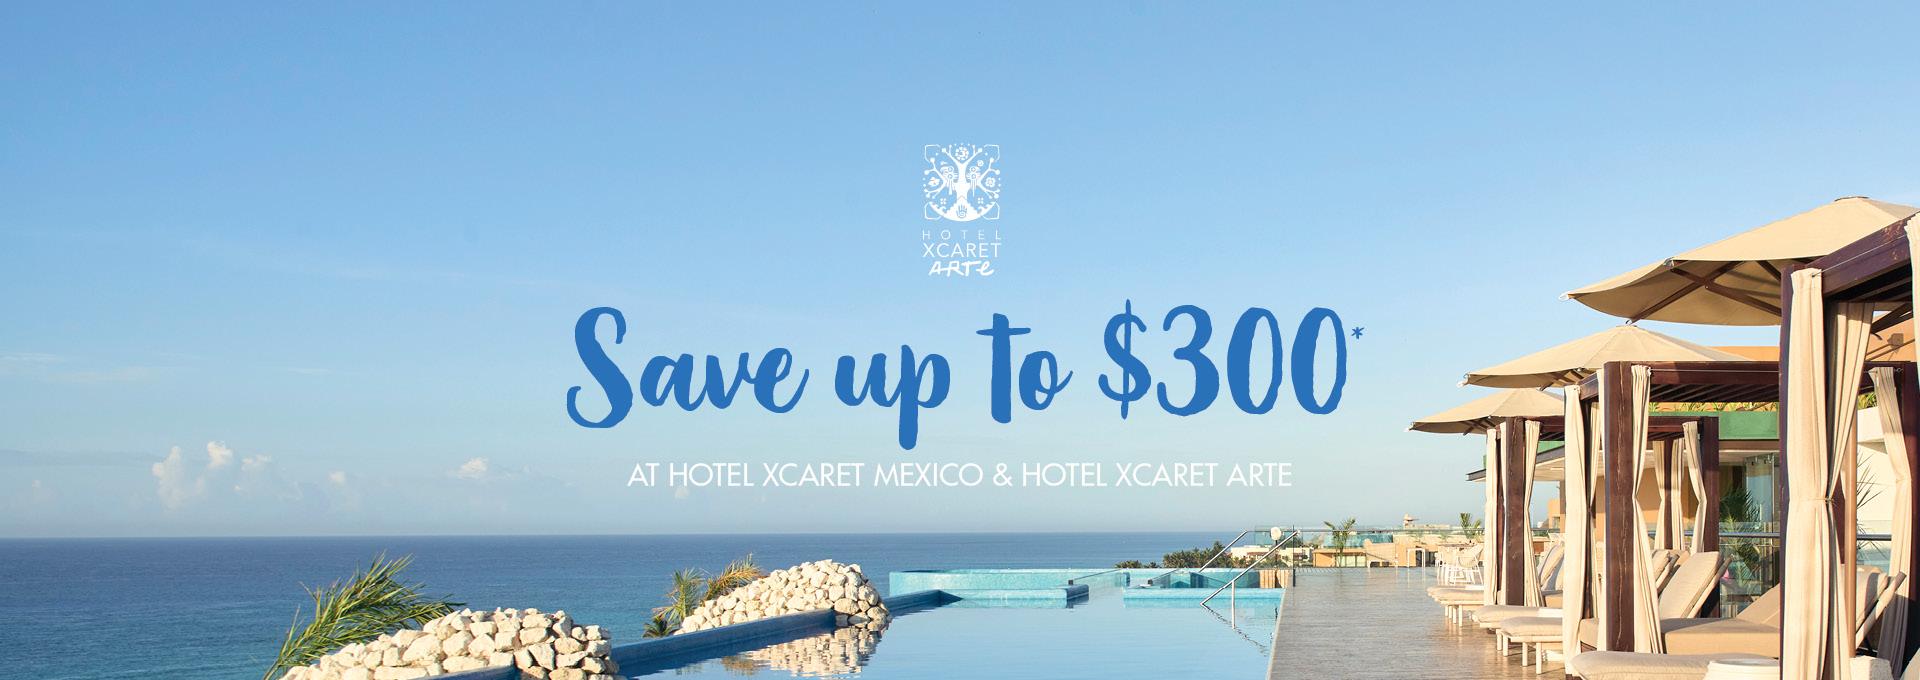 Save up to $300 at Hoteles Xcaret resorts